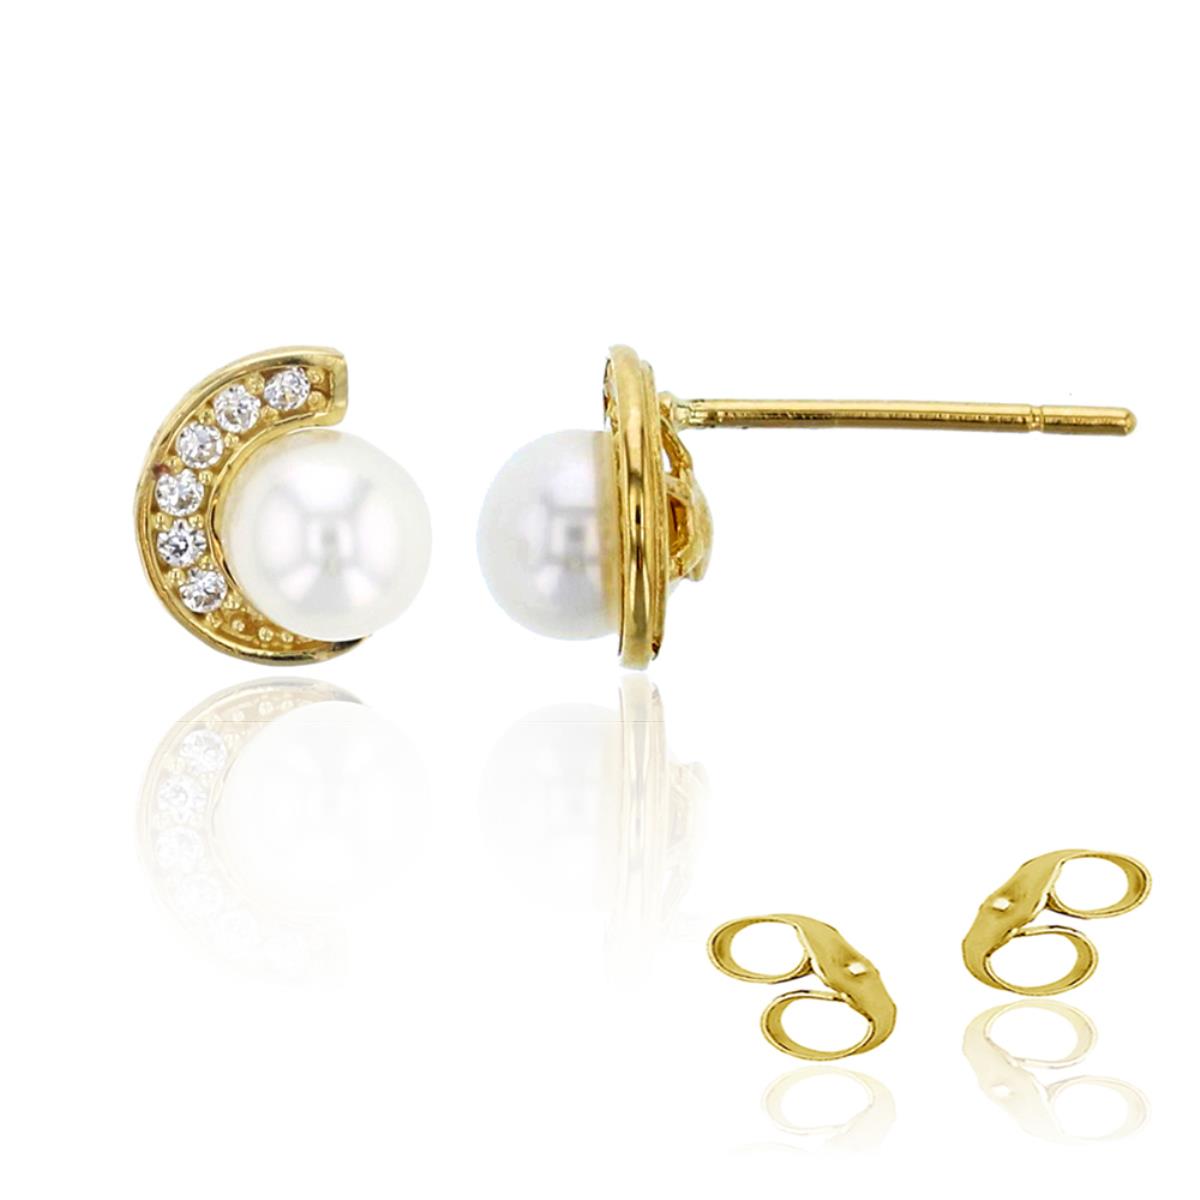 14K Yellow Gold Pave 4mm Fresh Water Pearl & CZ Moon Stud Earring with 4.5mm Clutch